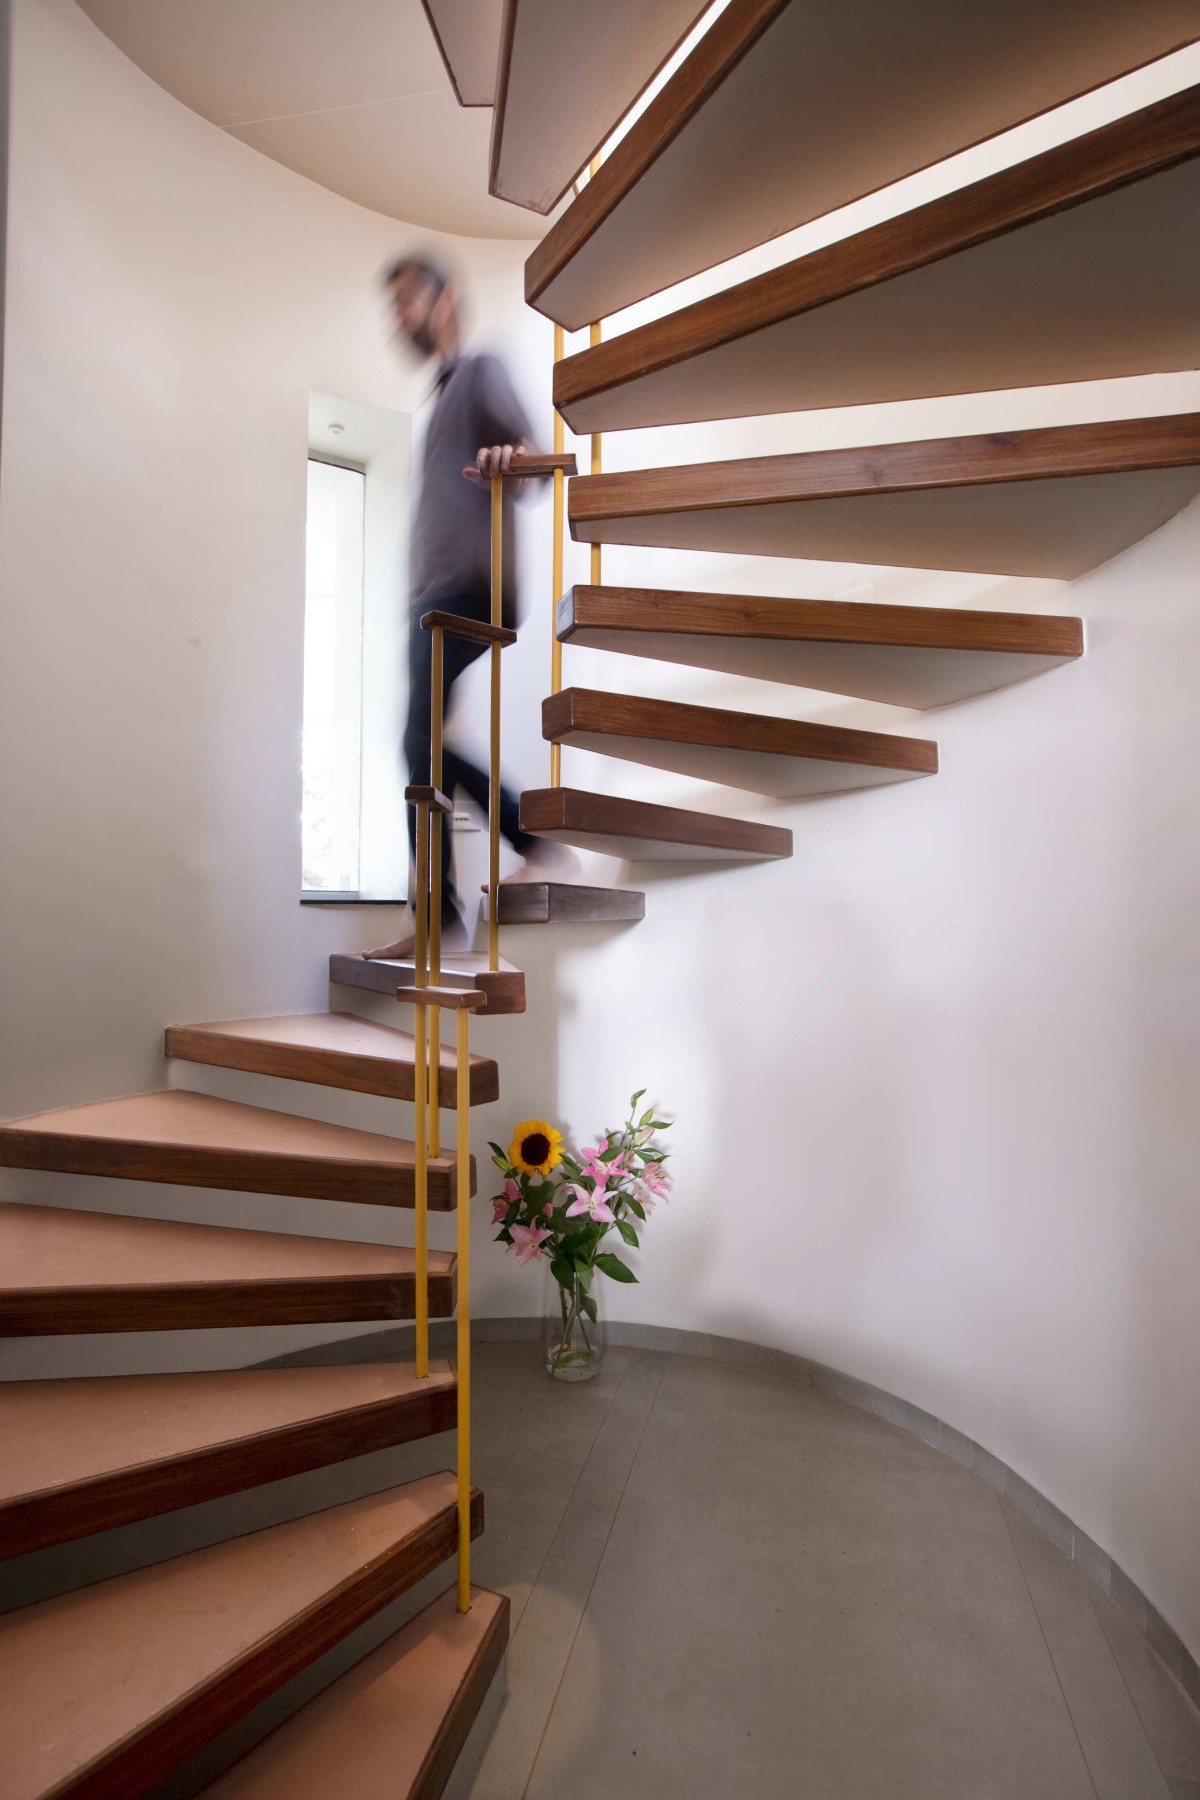 Staircase of Godbole Residence by Chaware & Associates